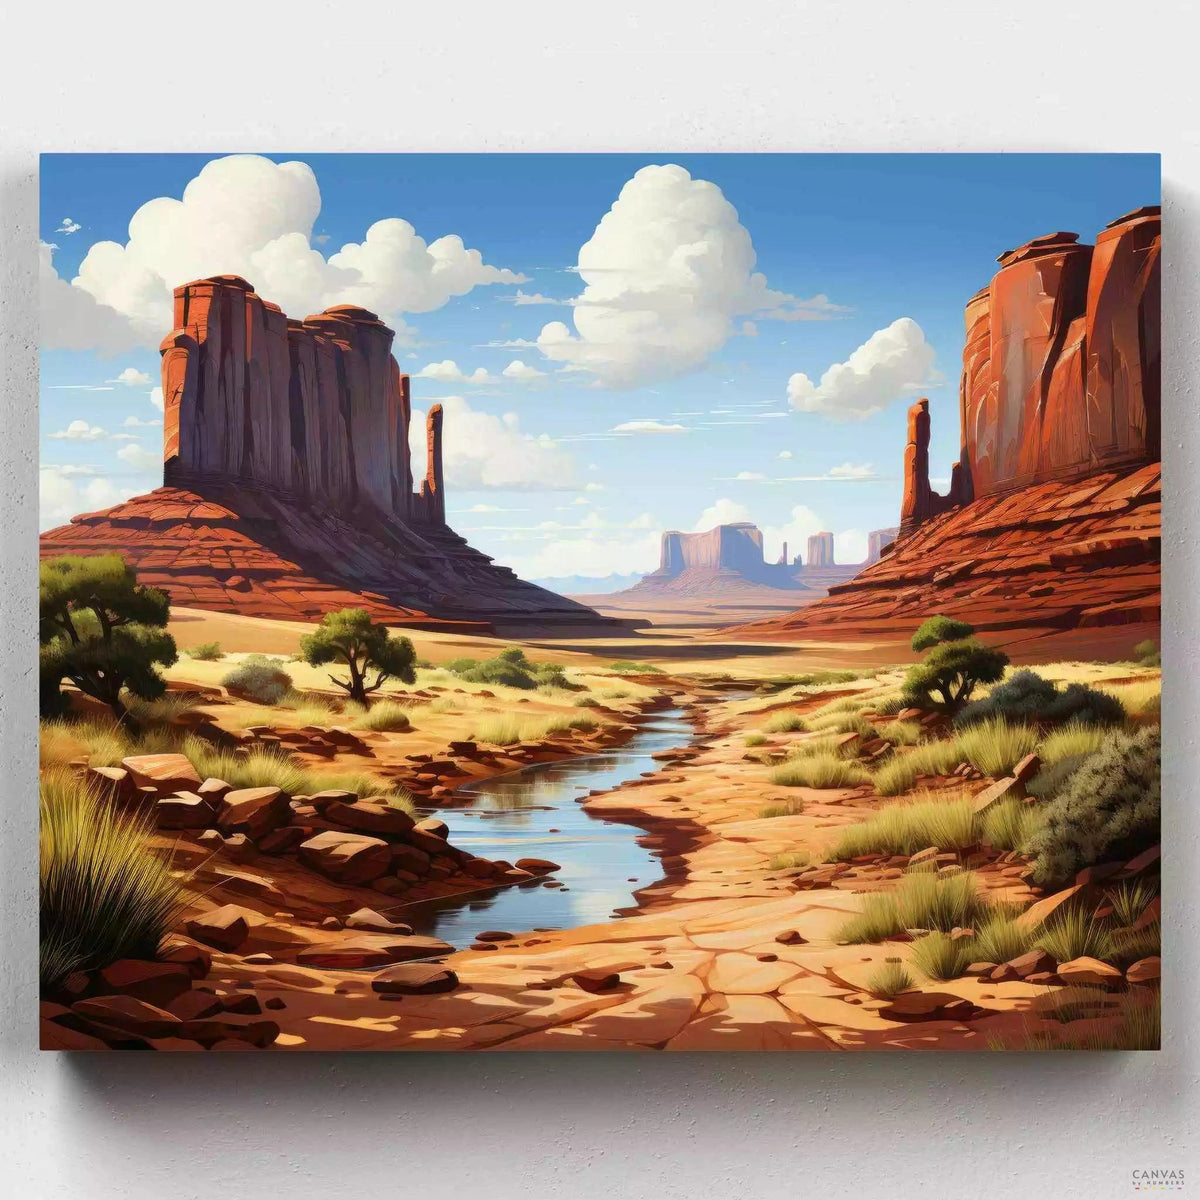 Monument Valley Painting by Numbers-Capture the iconic red sandstone formations with Monument Valley painting kit. Experience the landscape painting of terrains & blue skies of Navajo Tribal Park.-Canvas by Numbers